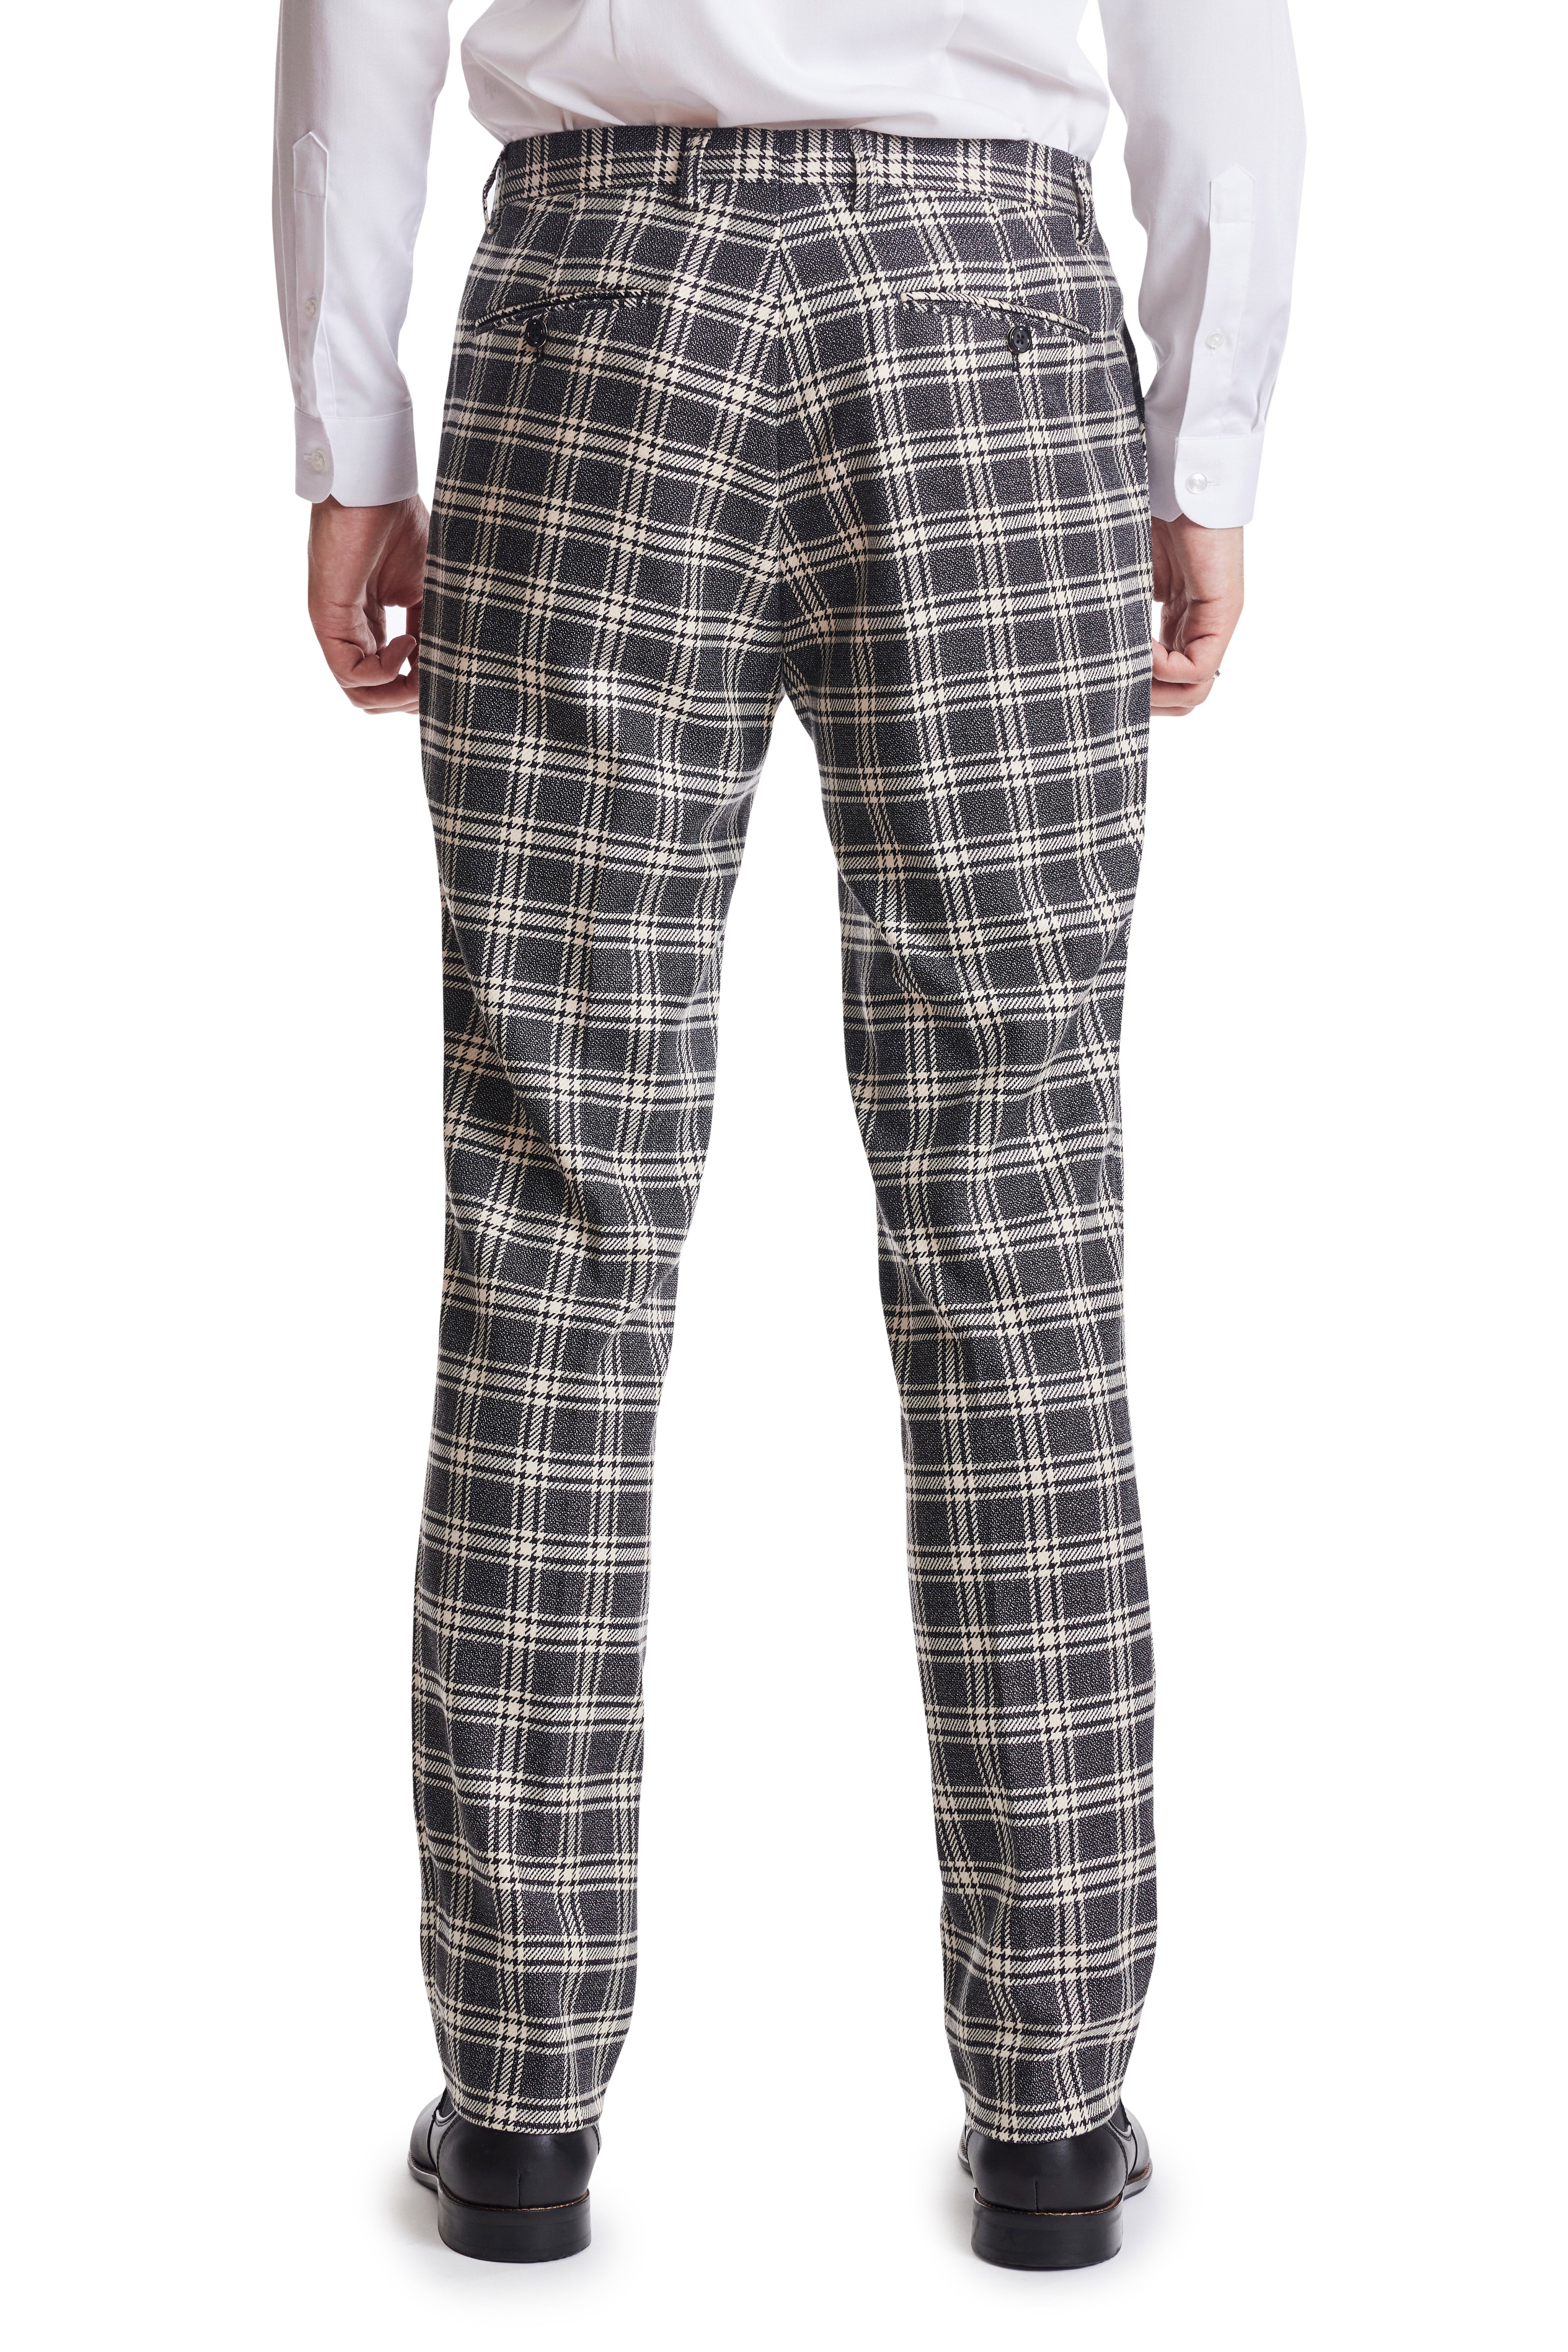 Where to Buy the Best Checkered Trousers | Who What Wear